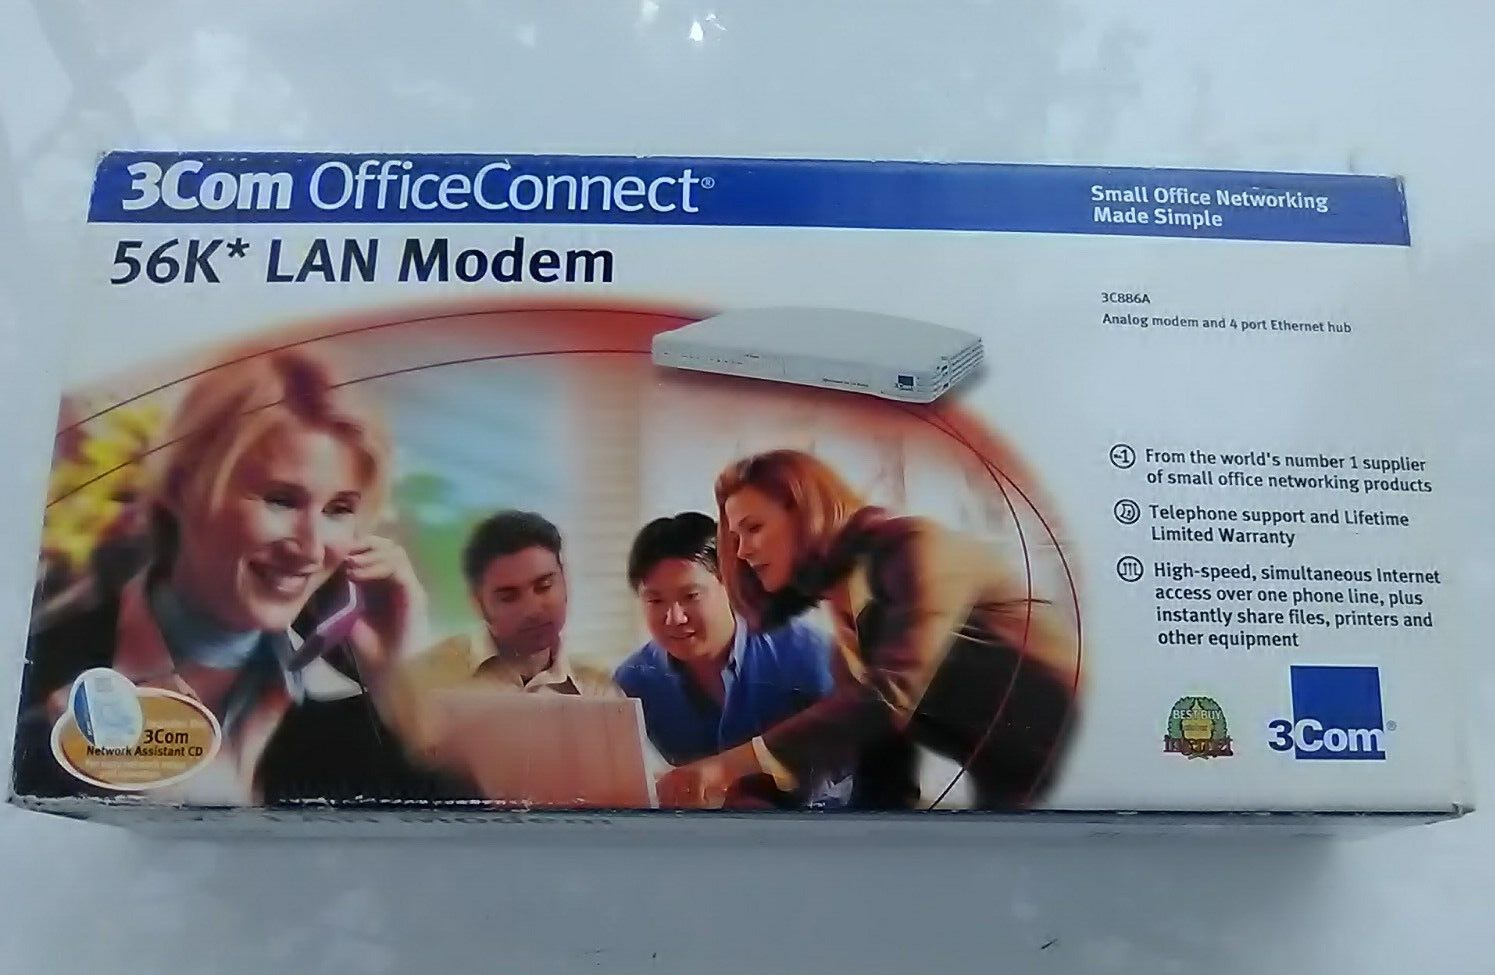 3Com OfficeConnect 3C886  Small Office Networking  4 port Ethernet Hub